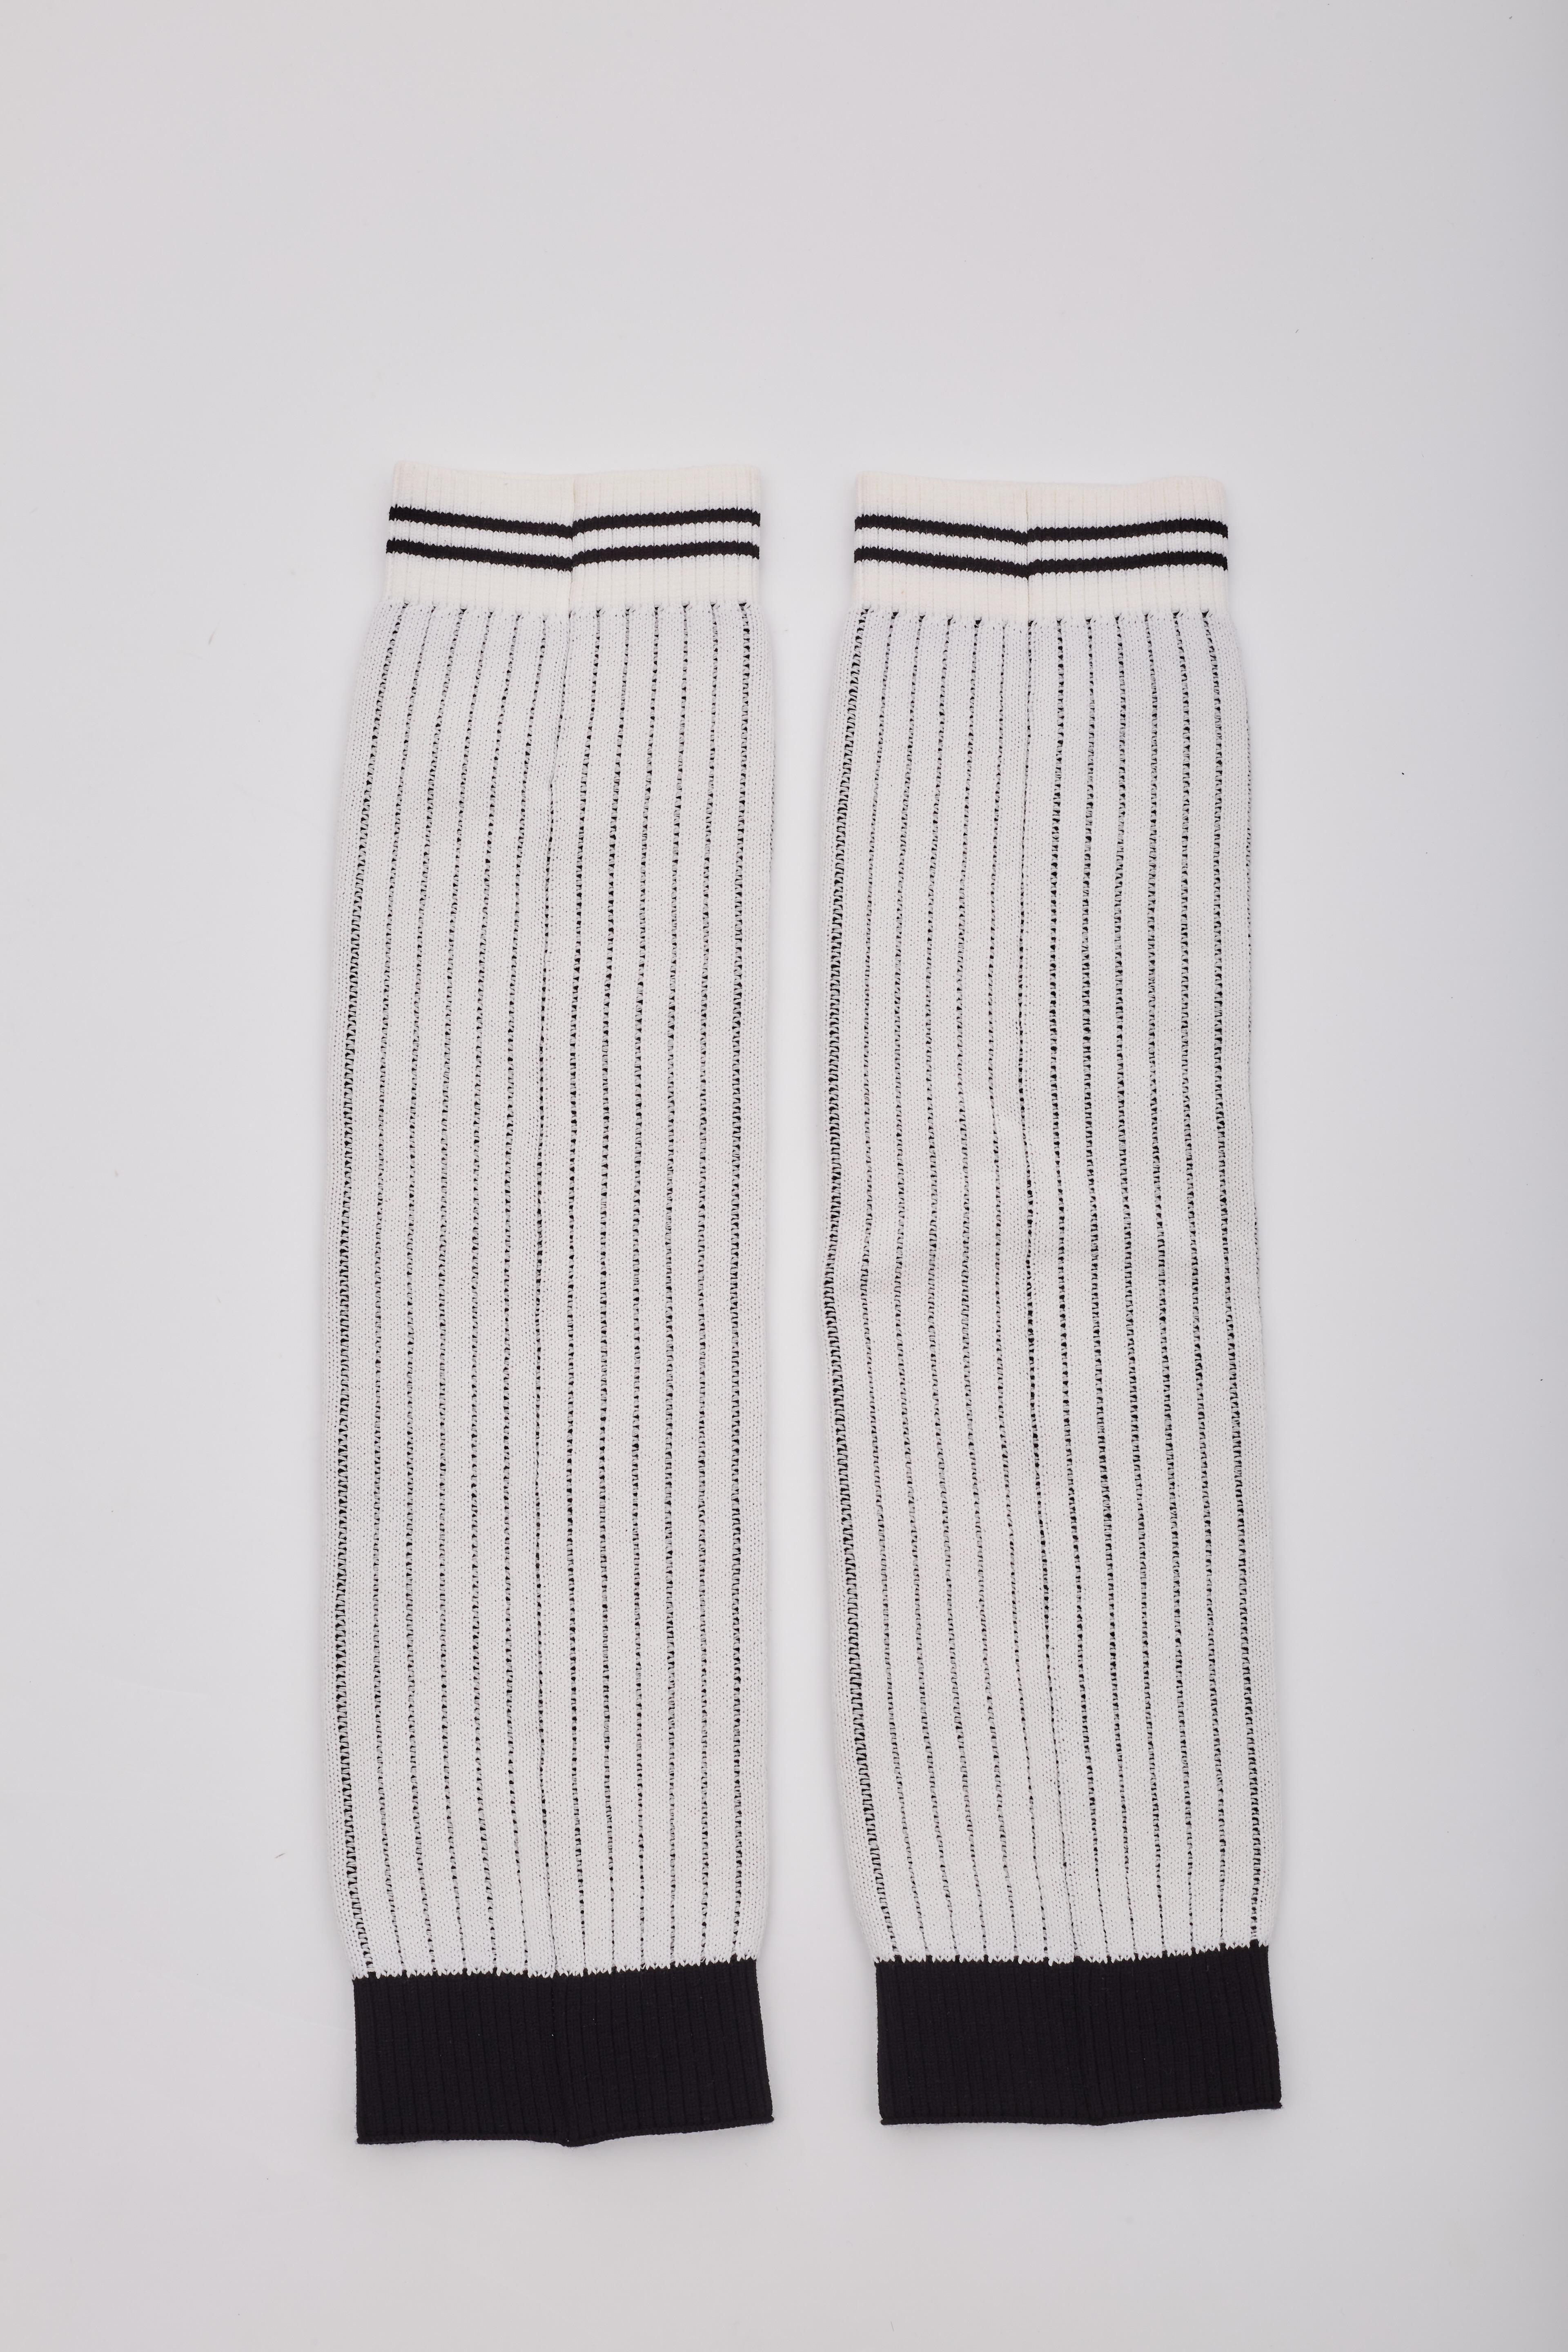 Chanel Logo White Knit Leg Warmers Gaiters In New Condition In Montreal, Quebec